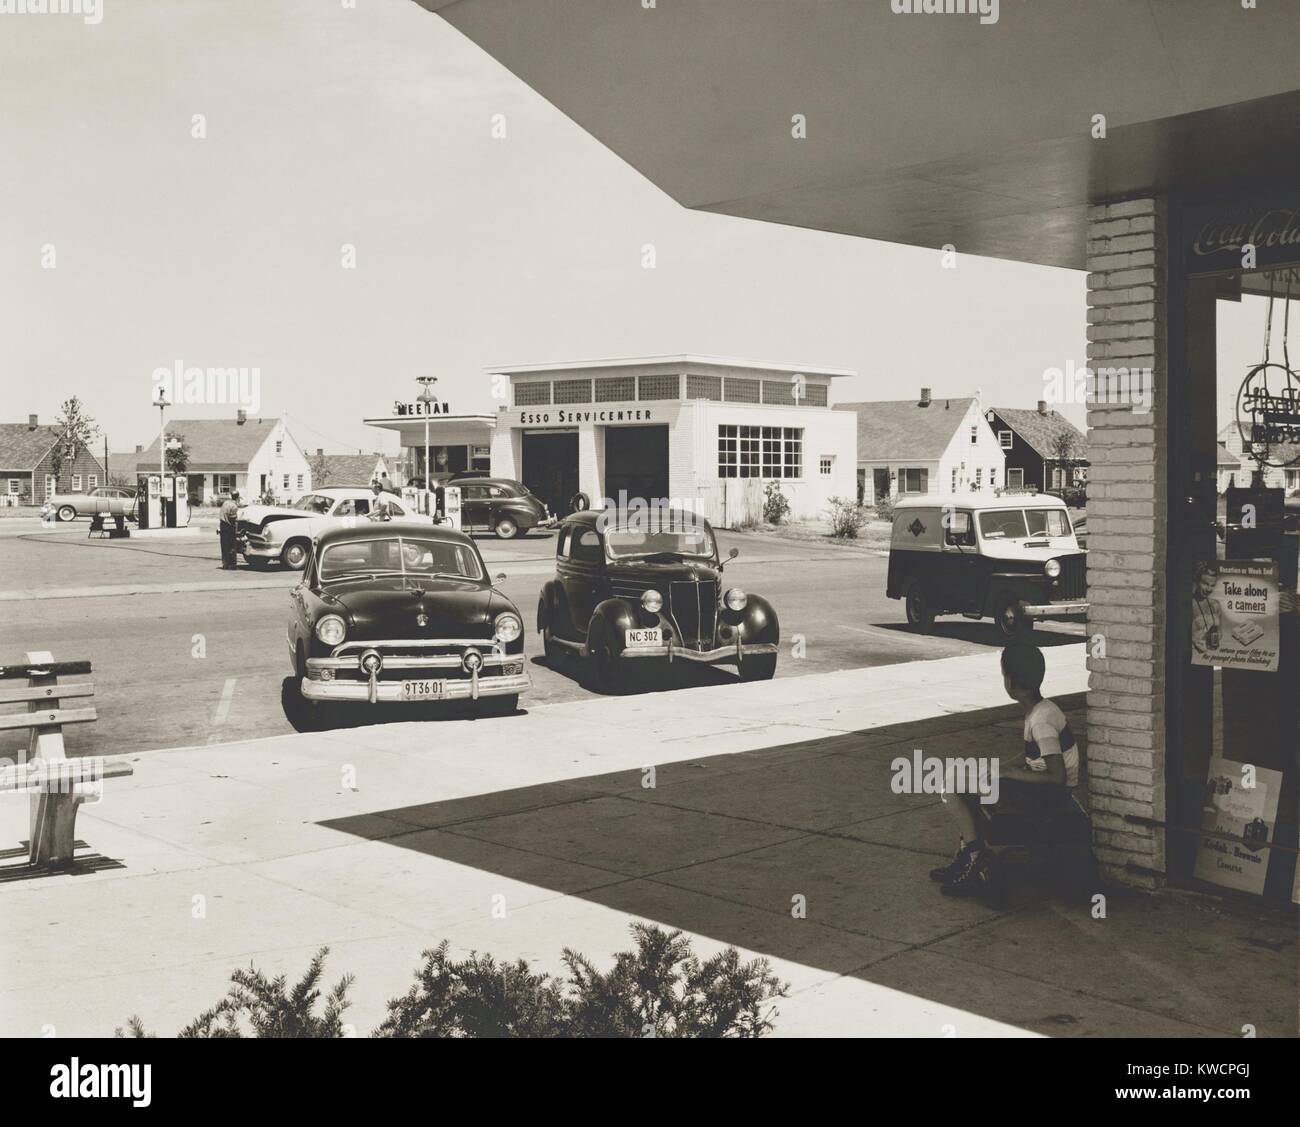 Levittown, N.Y. corner store across the street from a gas station. It was the first mass-produced suburb and had common public amenities such as community centers and stores. Aug. 21, 1952. - (BSLOC 2015 1 182) Stock Photo